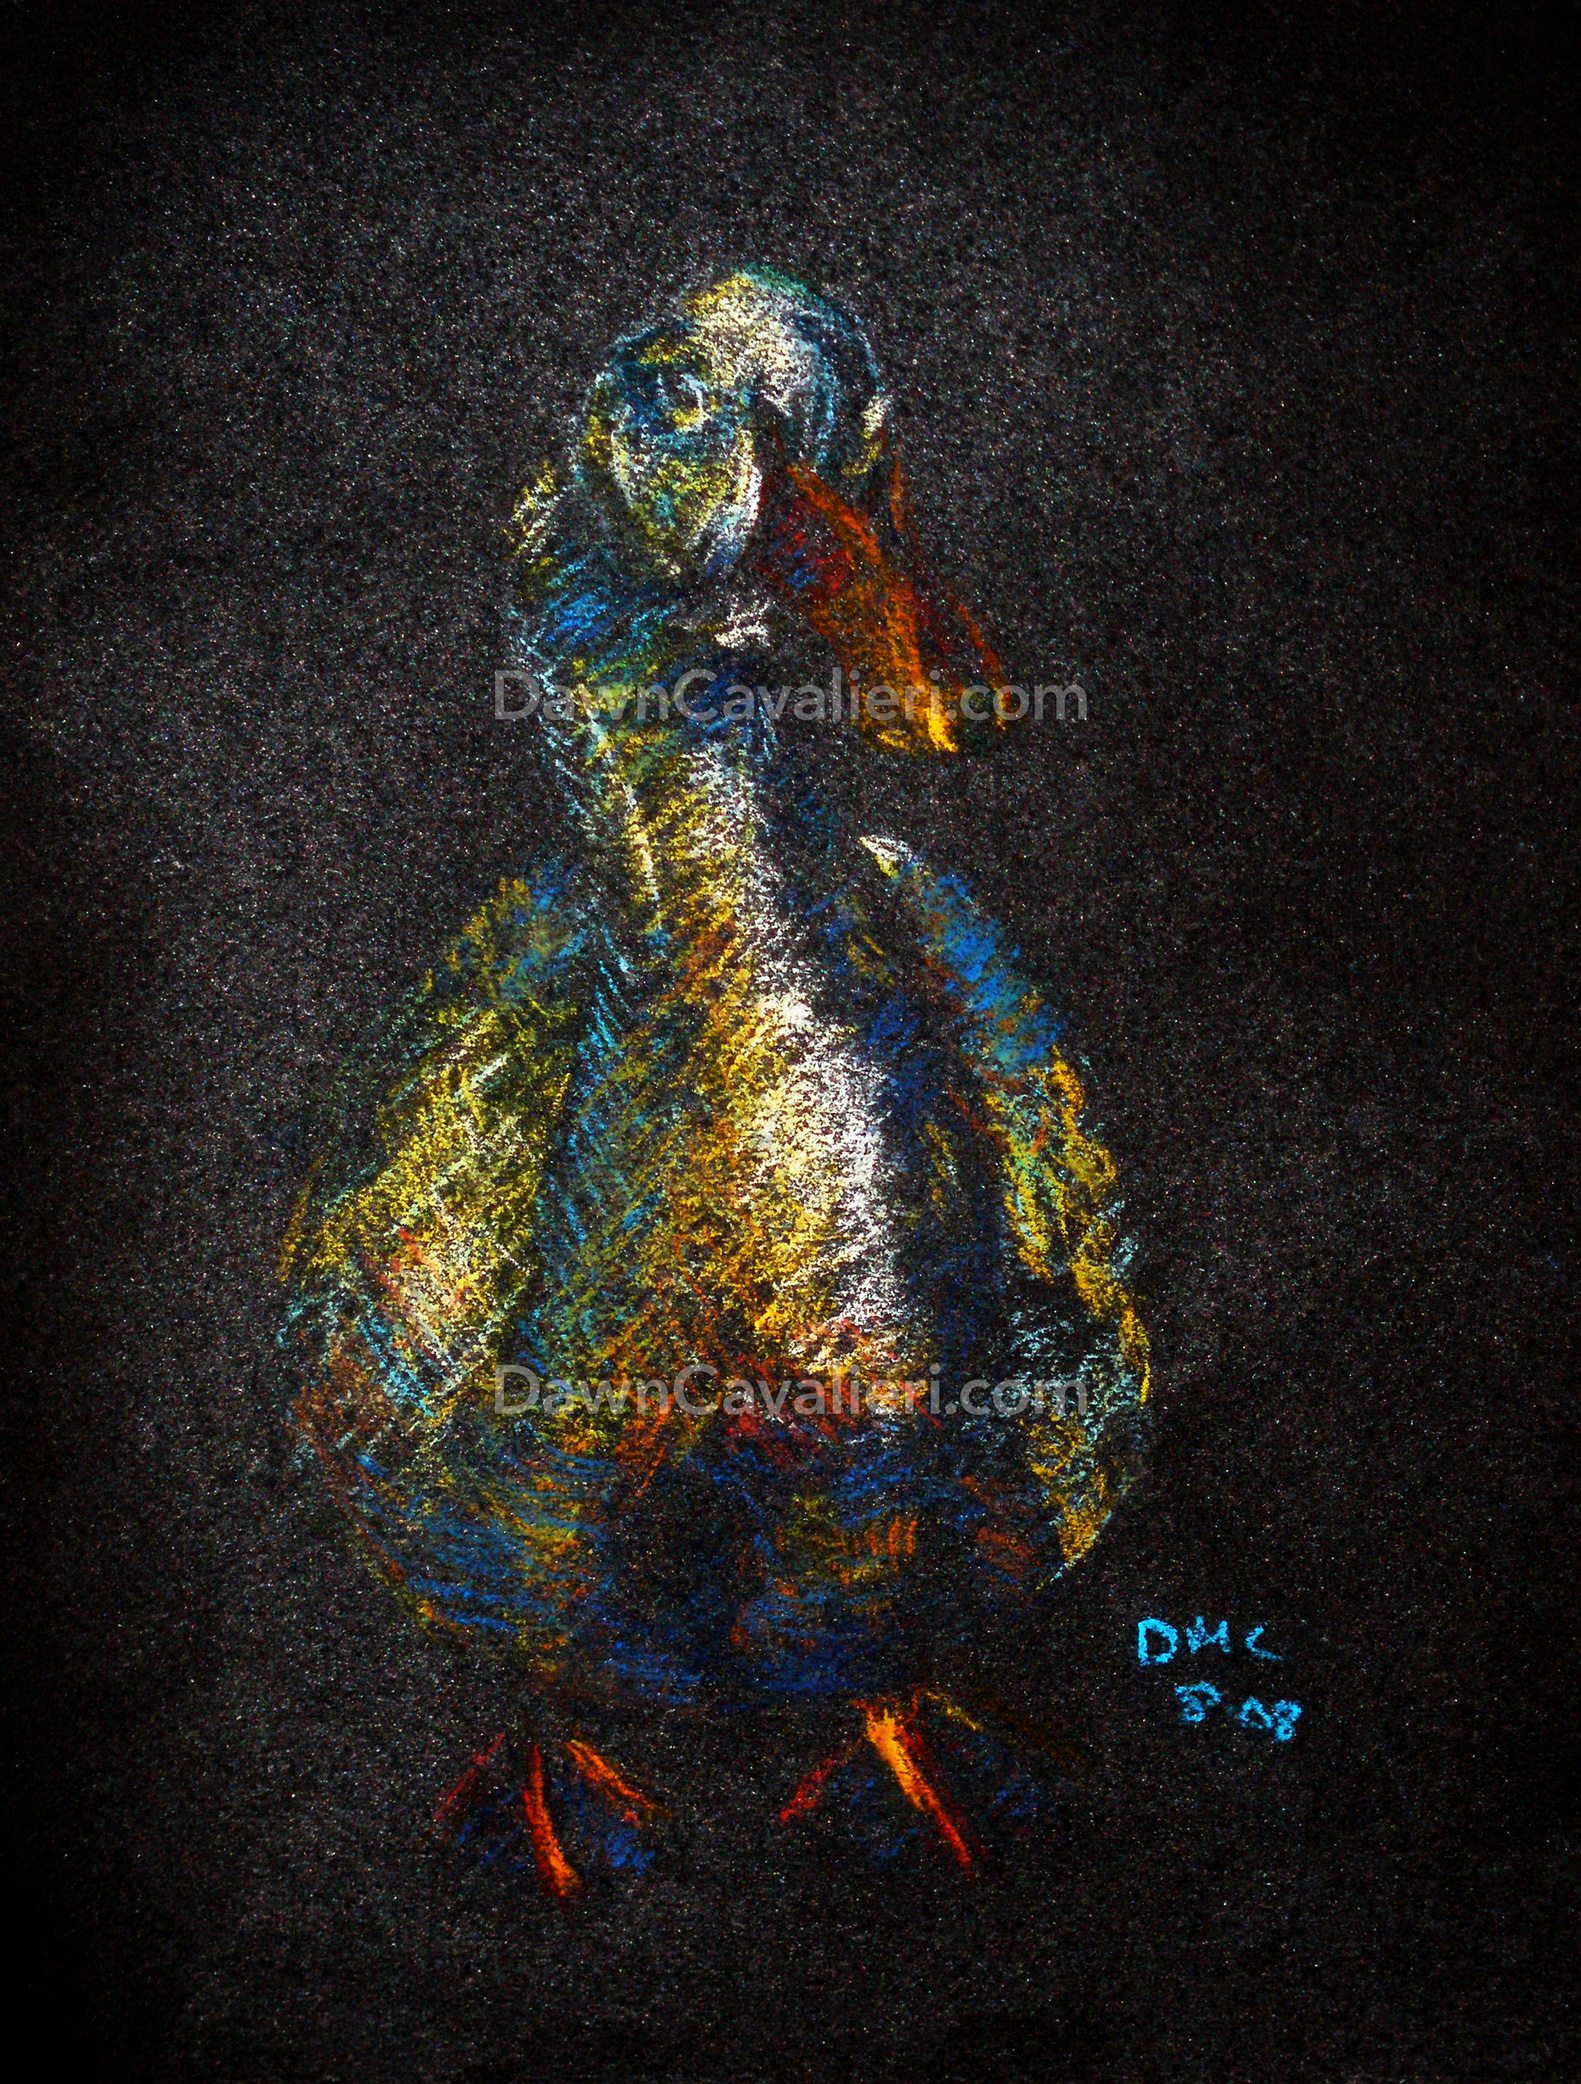 Portrait of a pekin duck, done in pastel on black paper. The duck is standing and facing forward, with his head turned to the right. The body is rendered in white and light tones of blue, yellow, and orange; the bill and feet are deep orange. The black paper serves as the darkest shadows and the background.